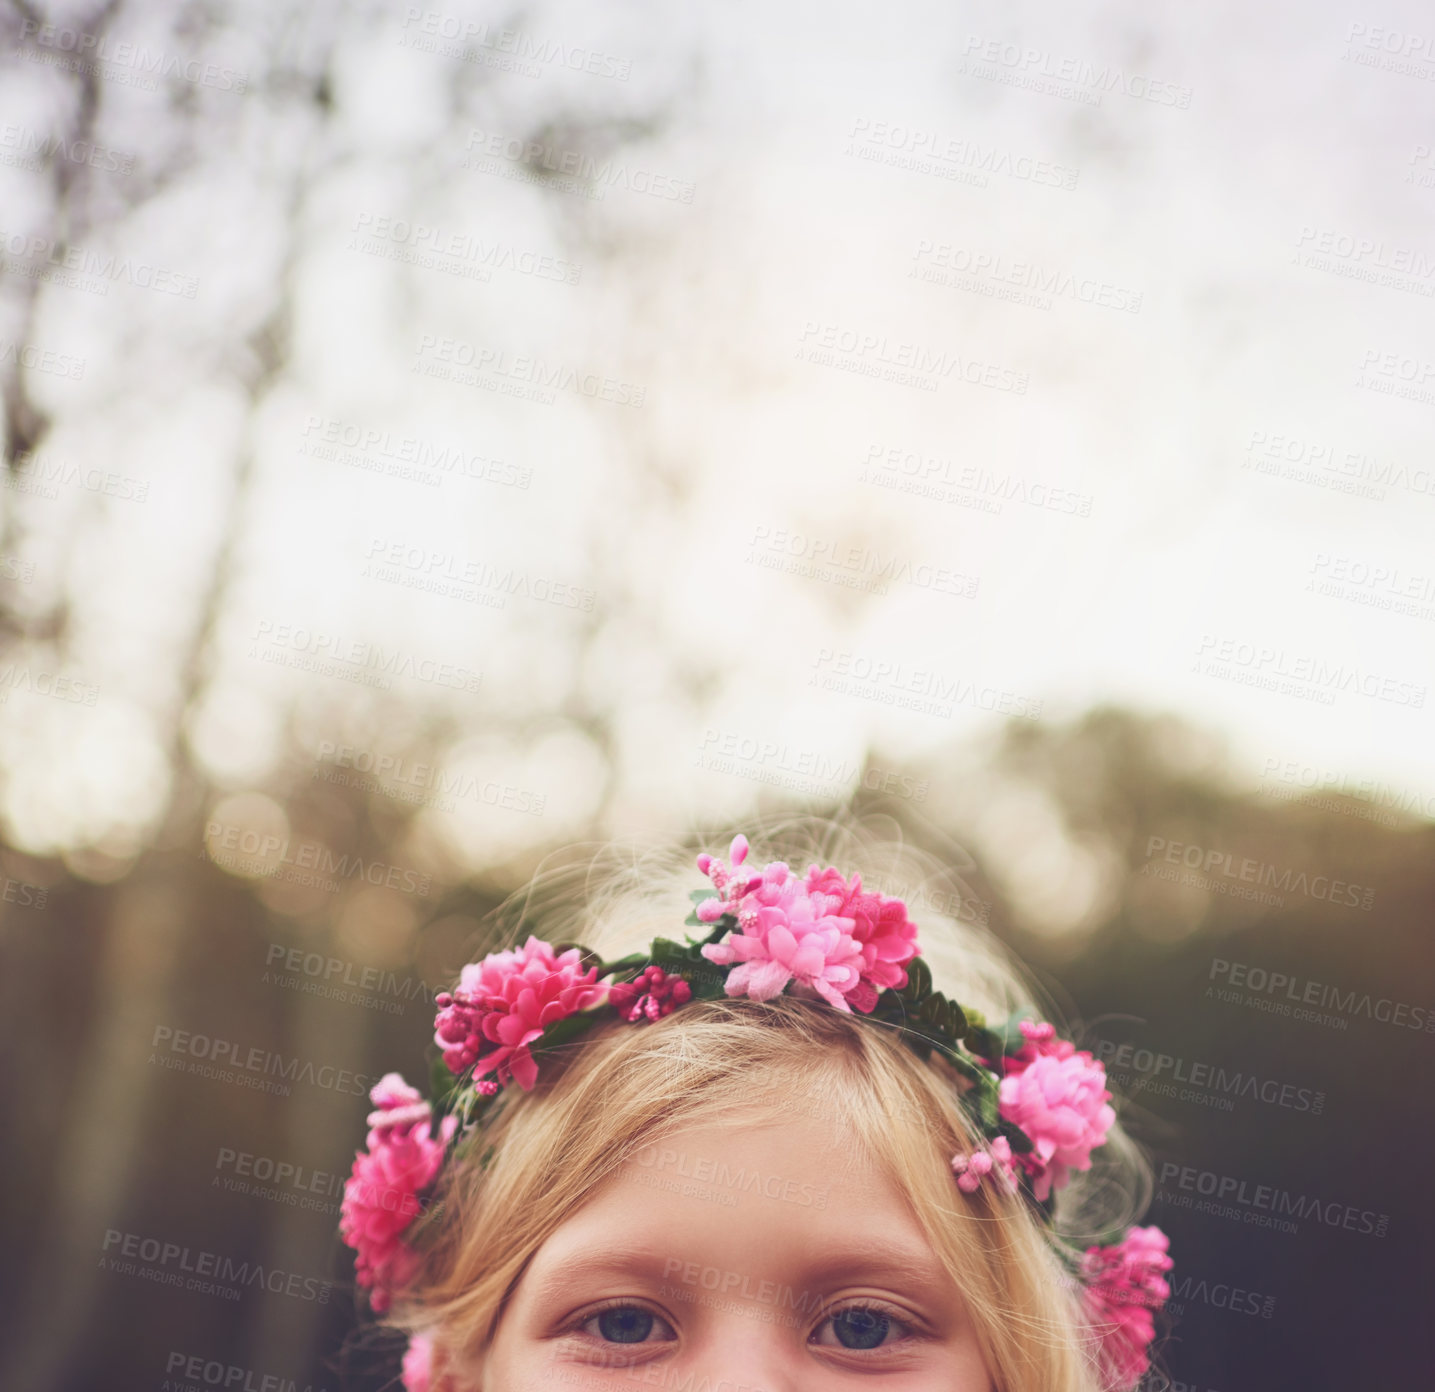 Buy stock photo Shot of a little girl's eyes looking at the camera and hiding while standing outside in nature